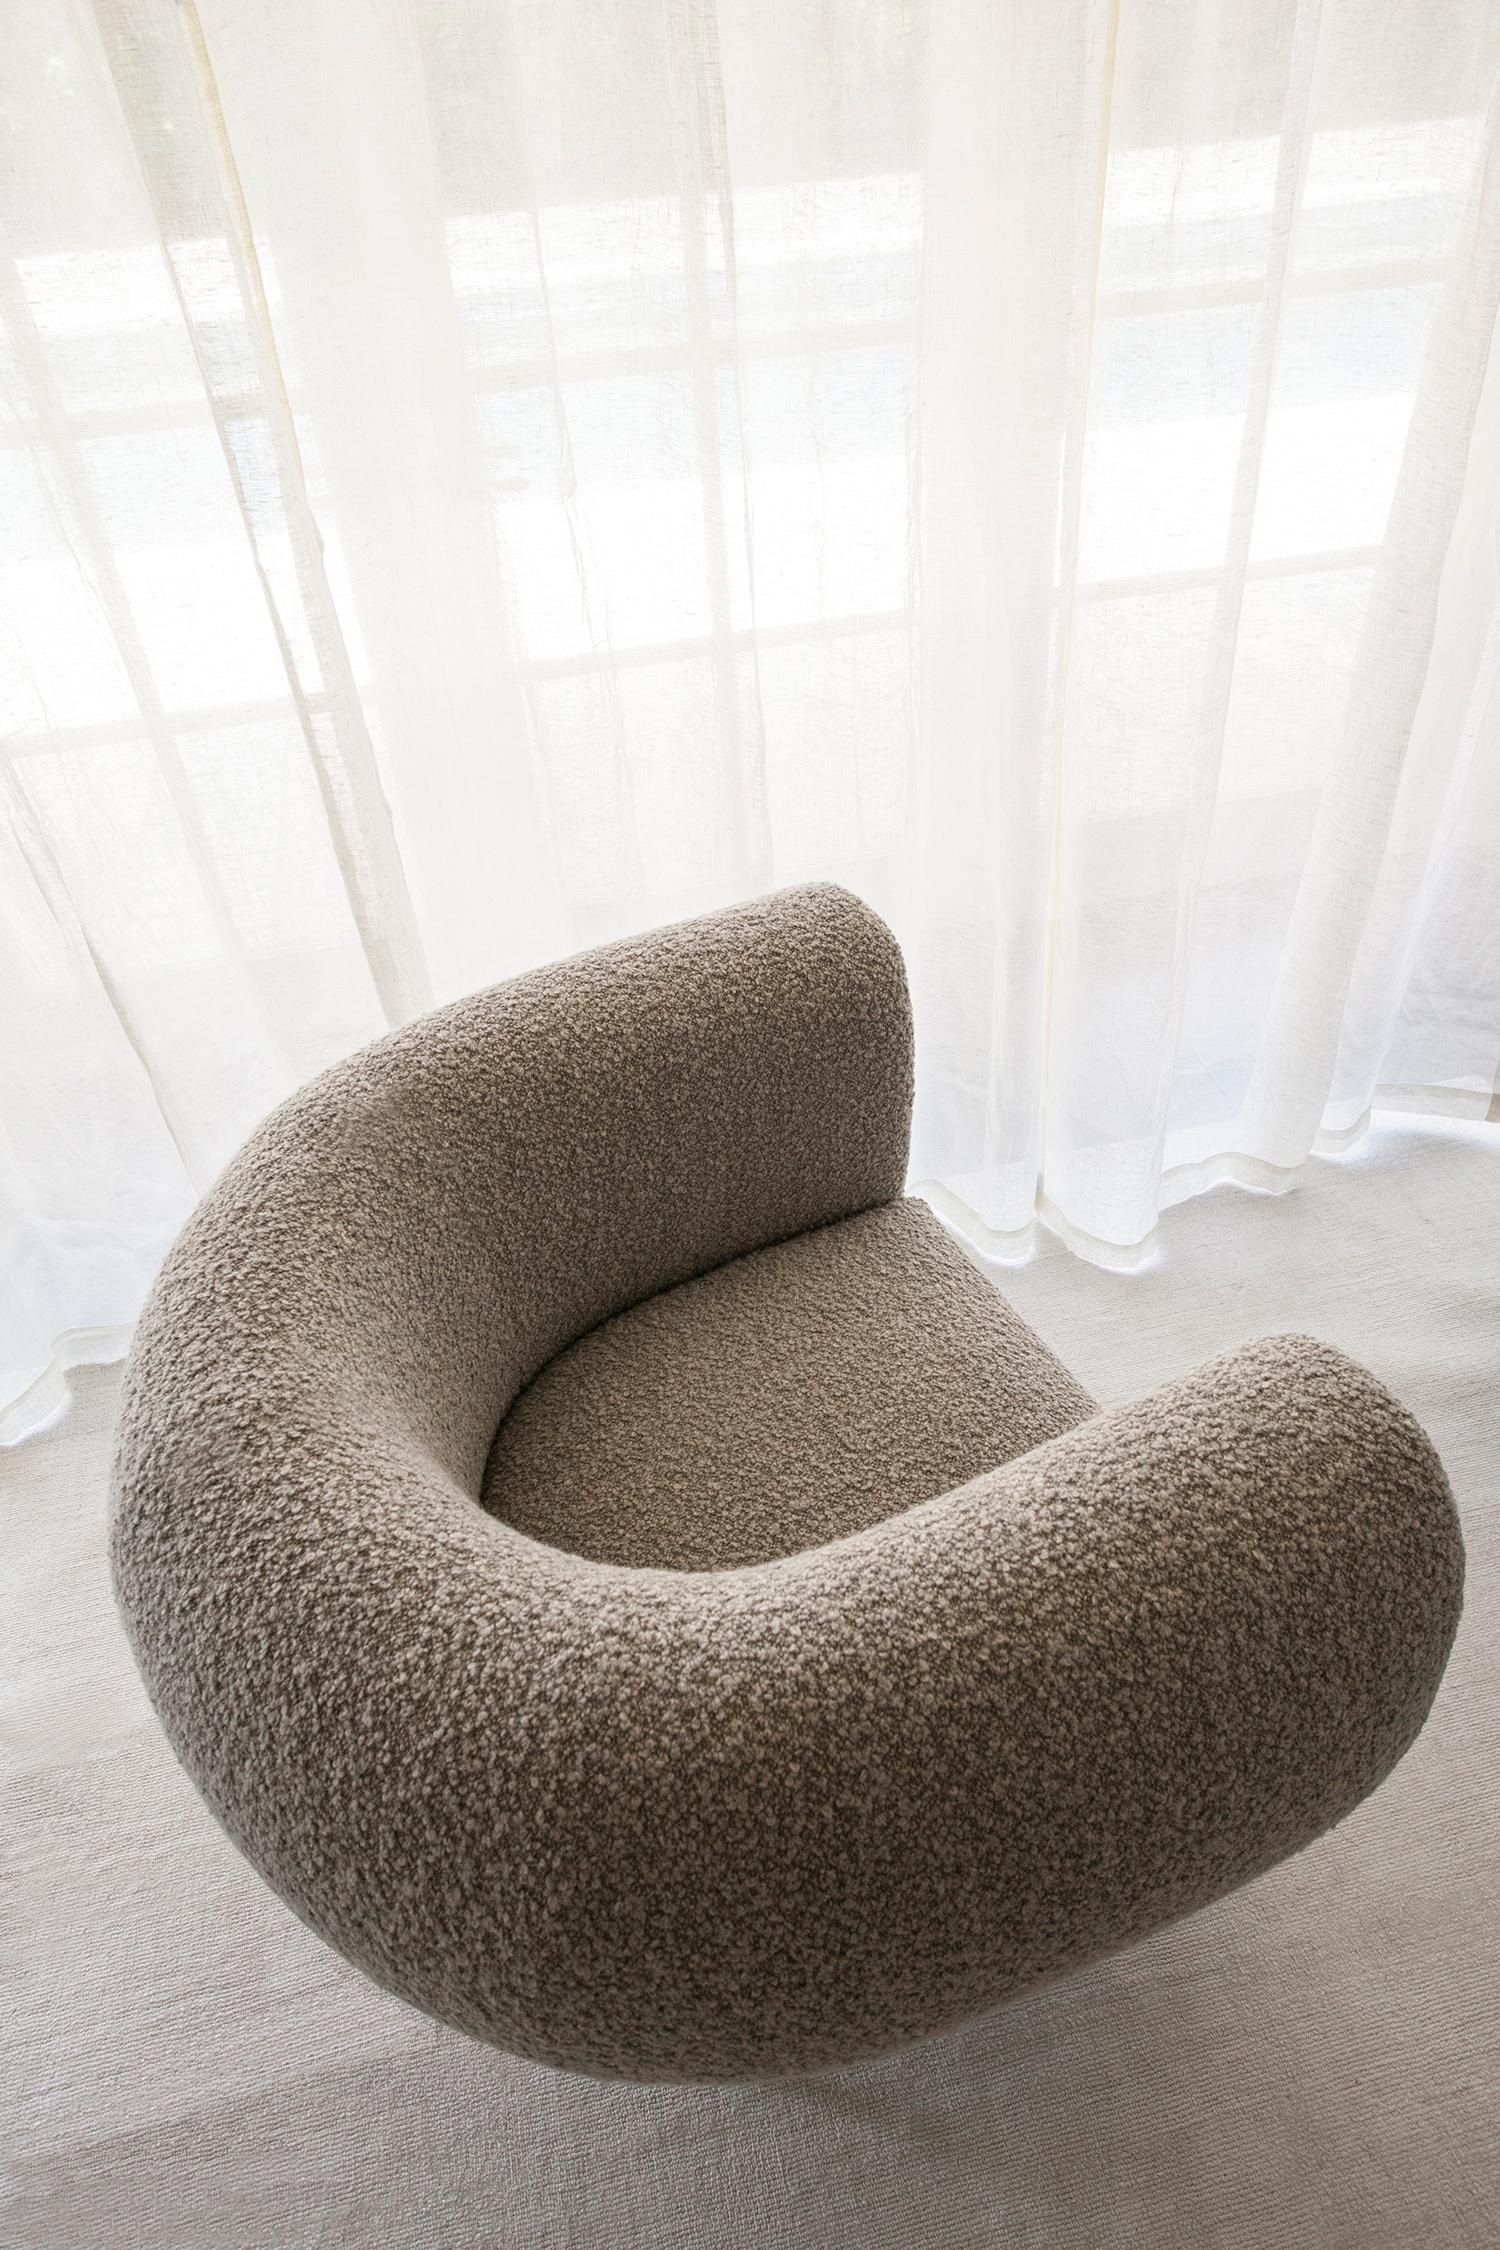 The Madda is a contemporary interpretation of the Classic club chair. The metal base fully wraps around the chair, as if to squeeze it into its plump and comfortable upper seating area. 

*** This listing is for the Madda chair in Fawn Boucle (see